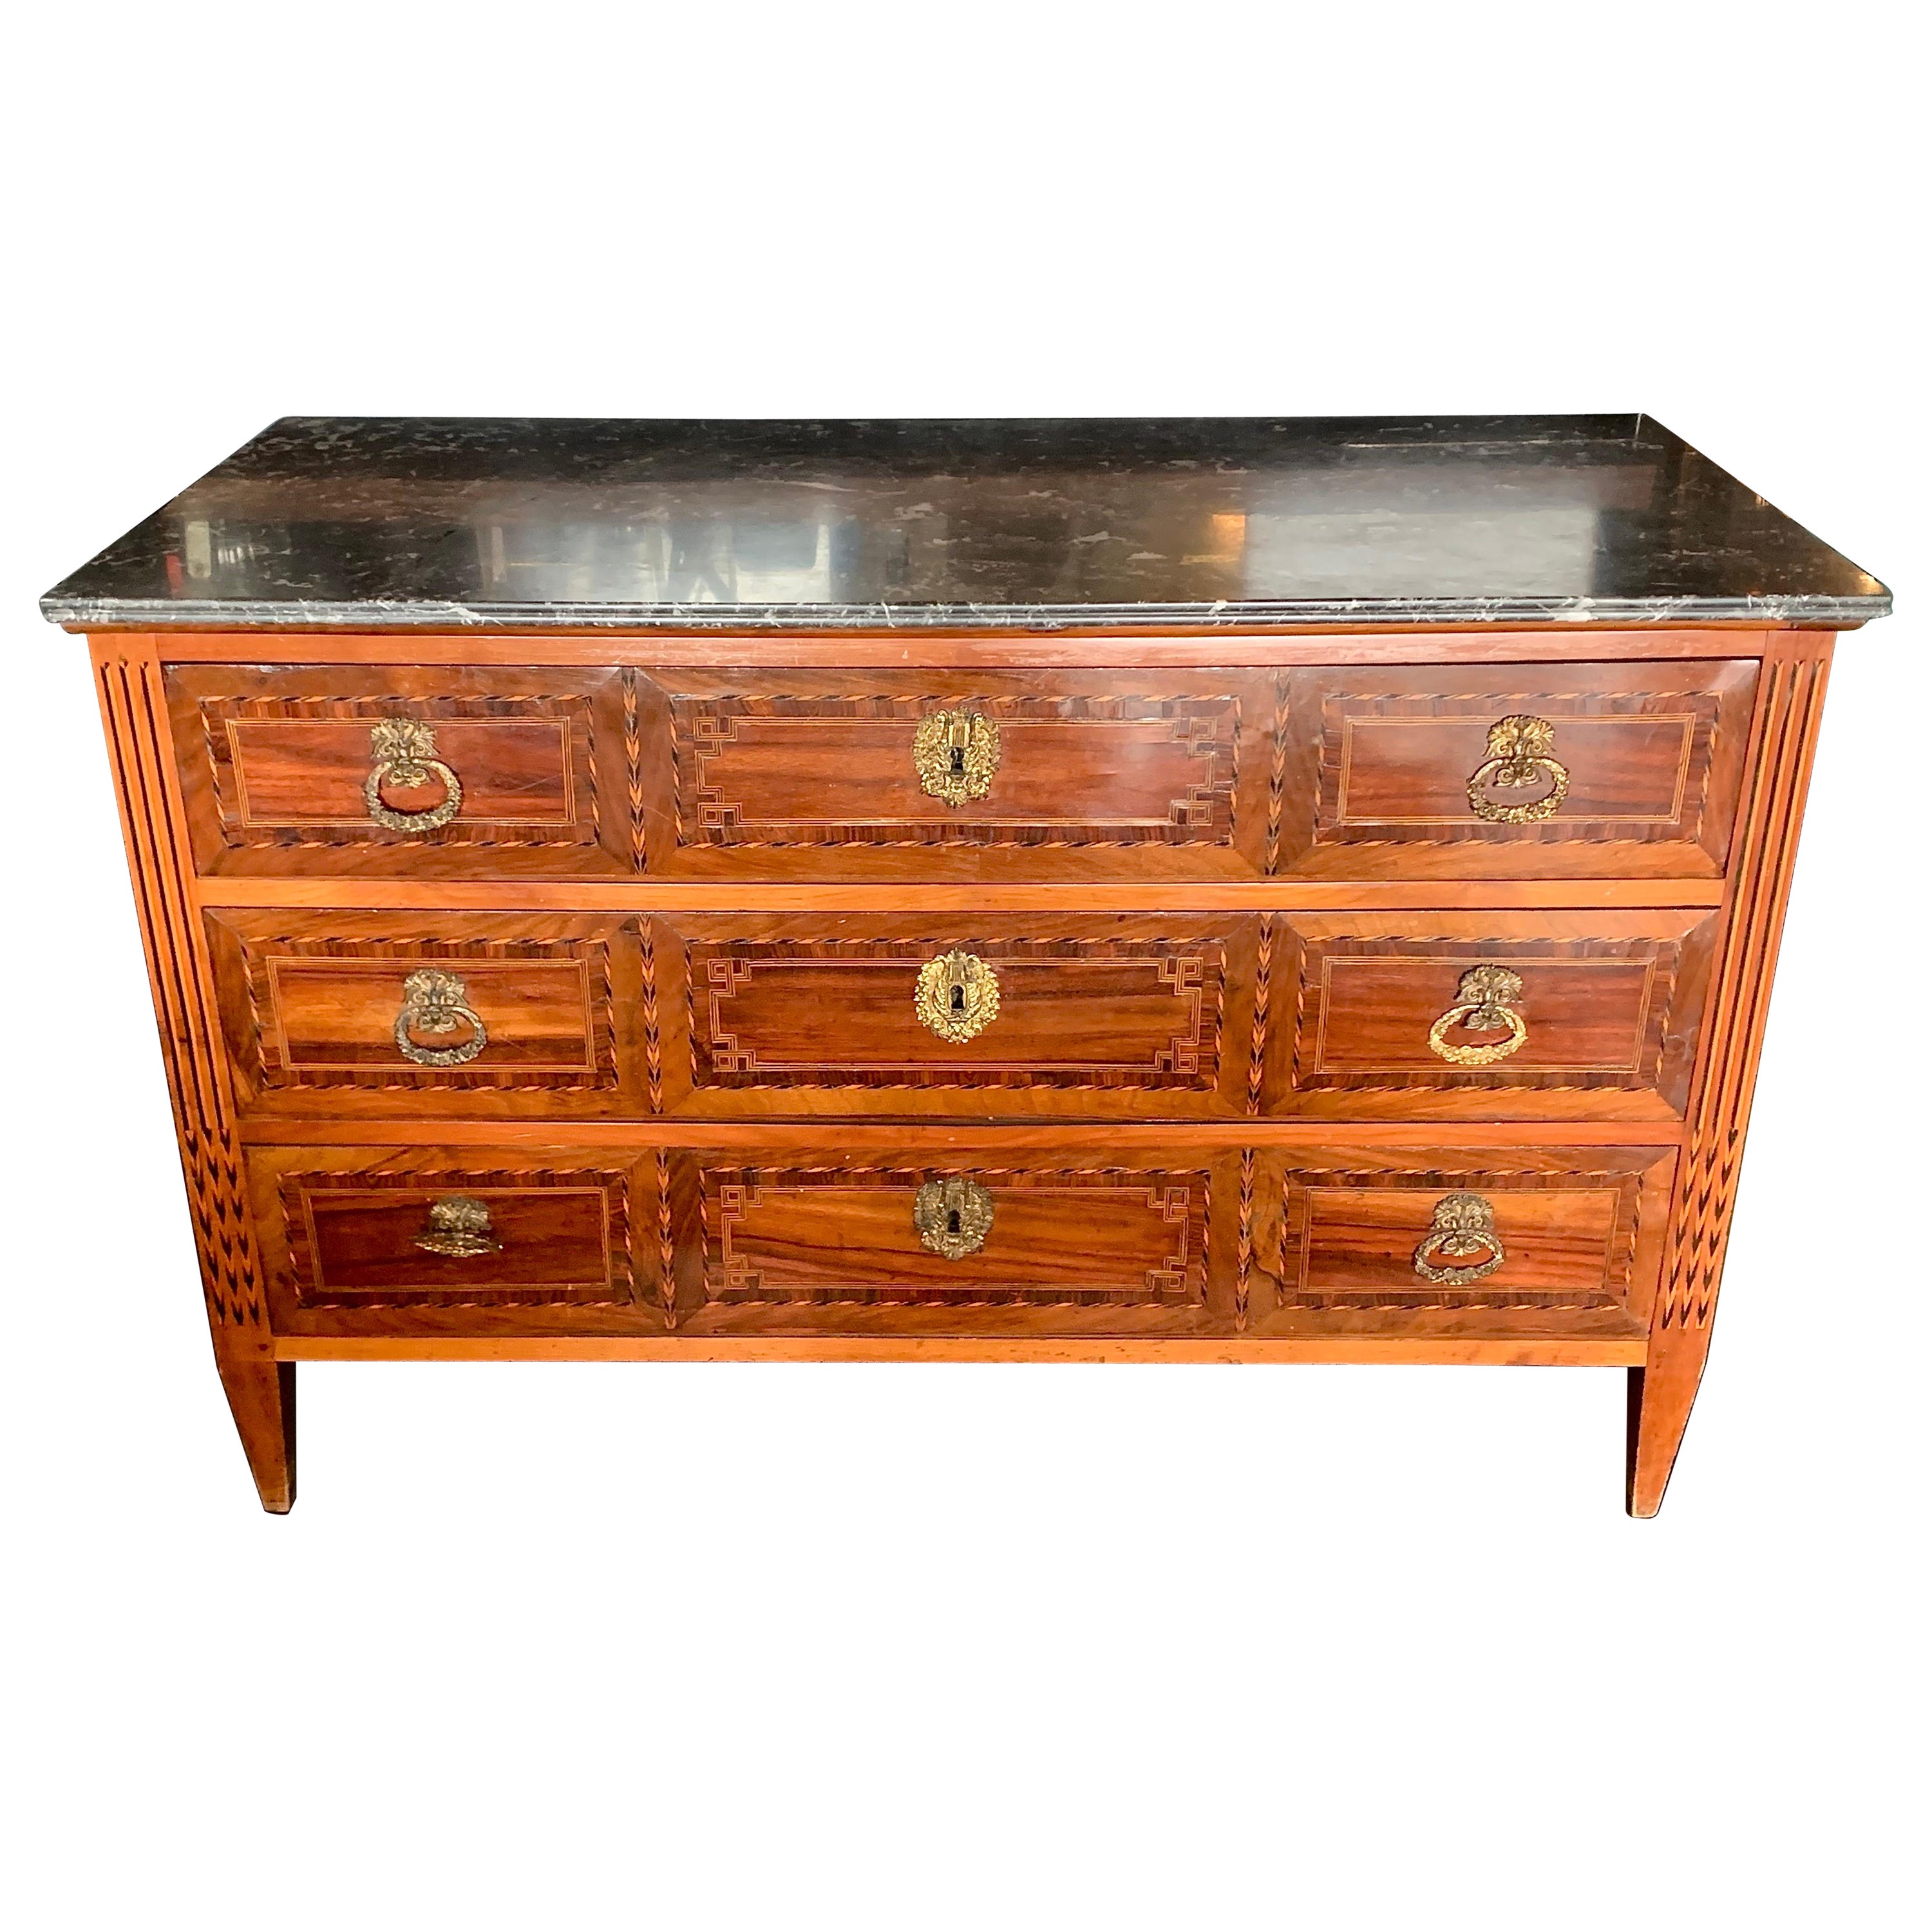 19th Century French Louis XVI Style Marquetry Walnut Commode Chest of Drawers For Sale